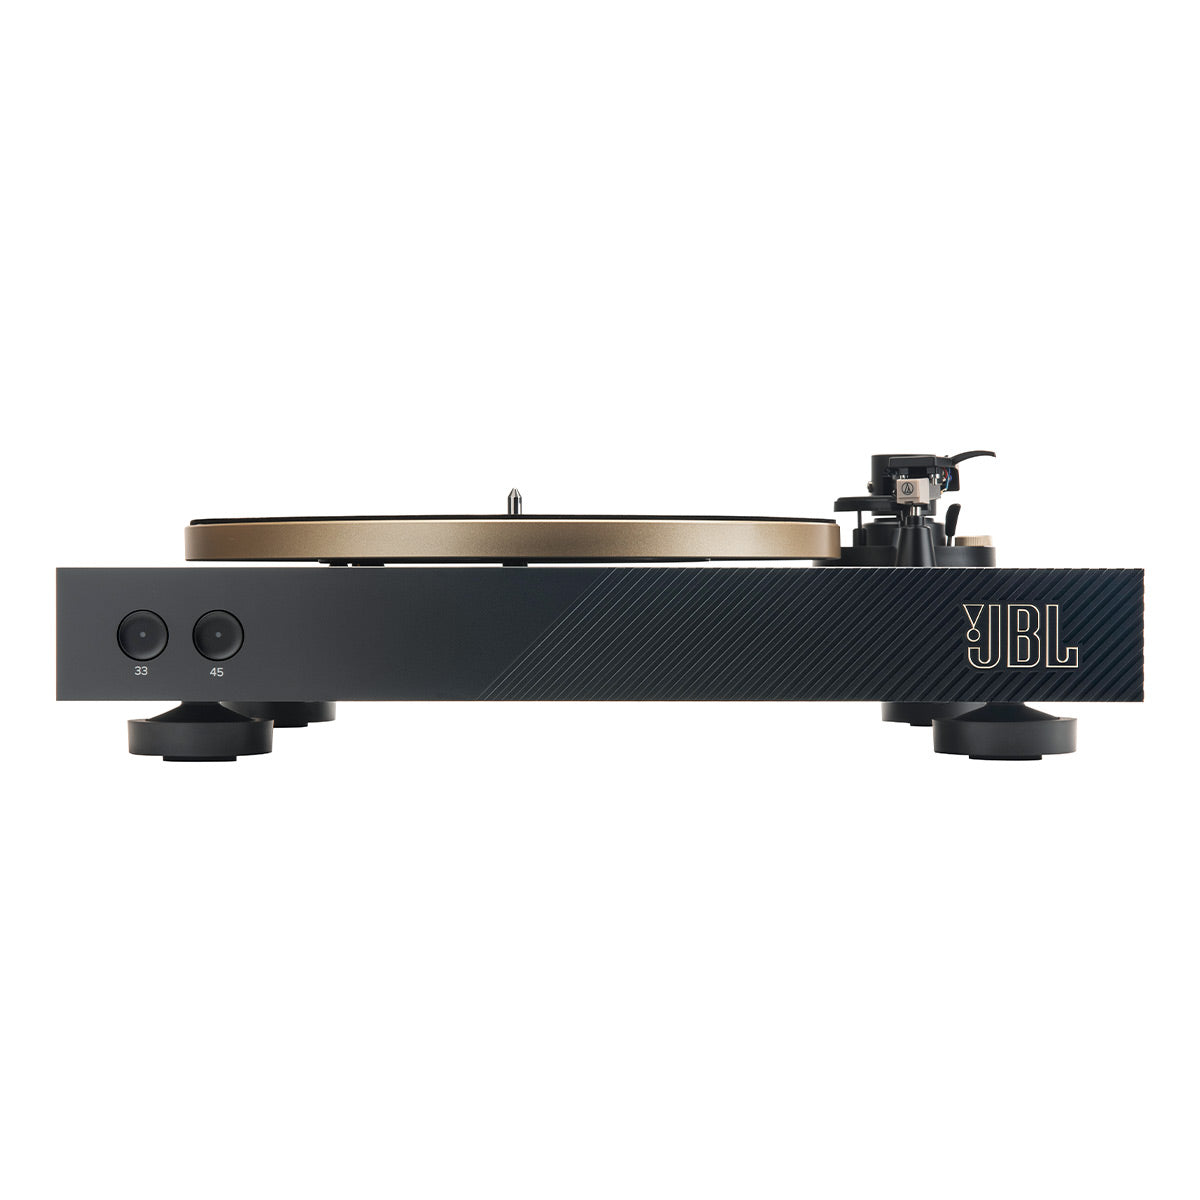 JBL Spinner BT Semi-Automatic Belt-Drive Turntable with Bluetooth 5.3 and Installed Audio Technica Cartridge (Black & Gold)